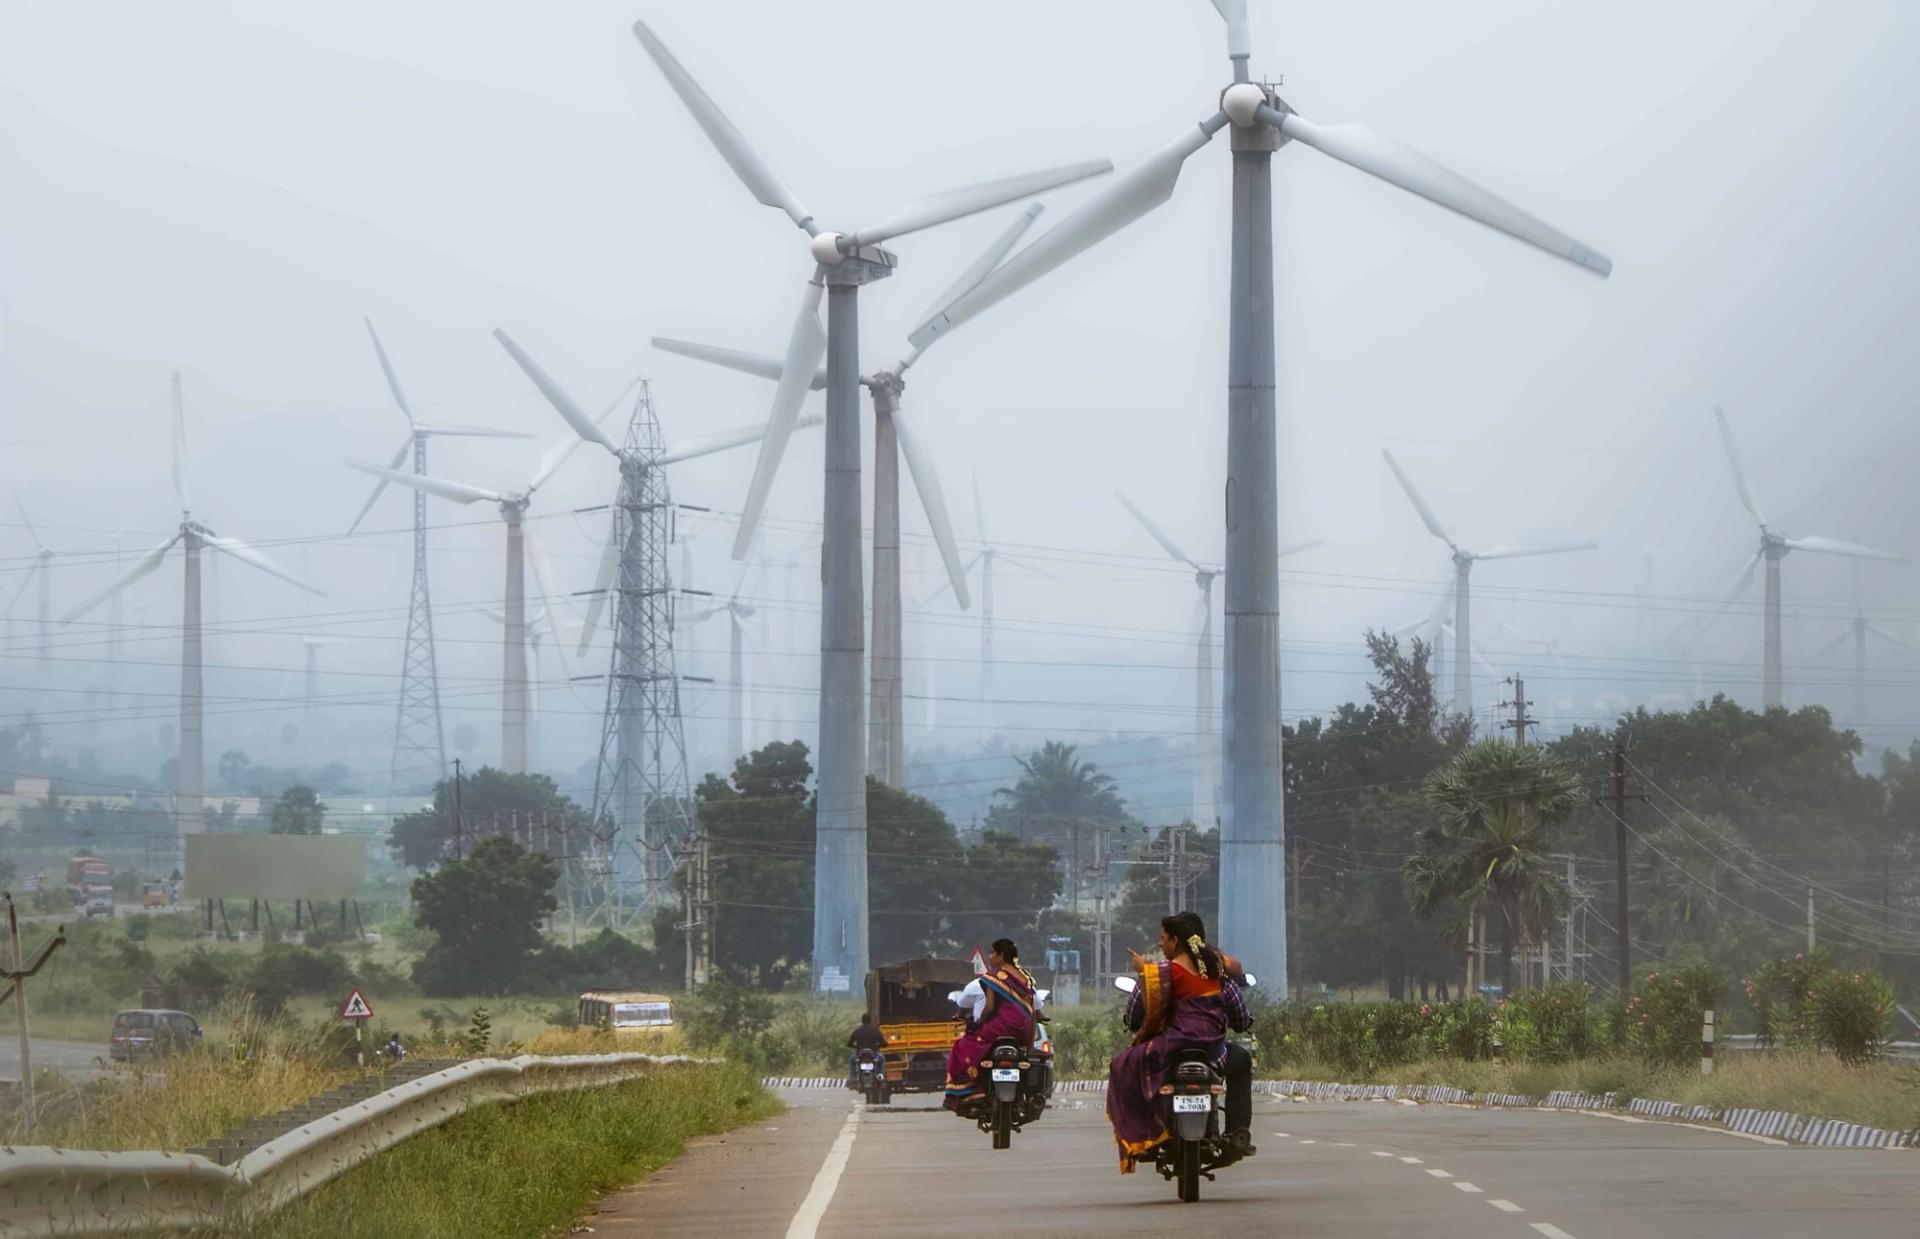 Motorcyclist on highway and wind turbines in India